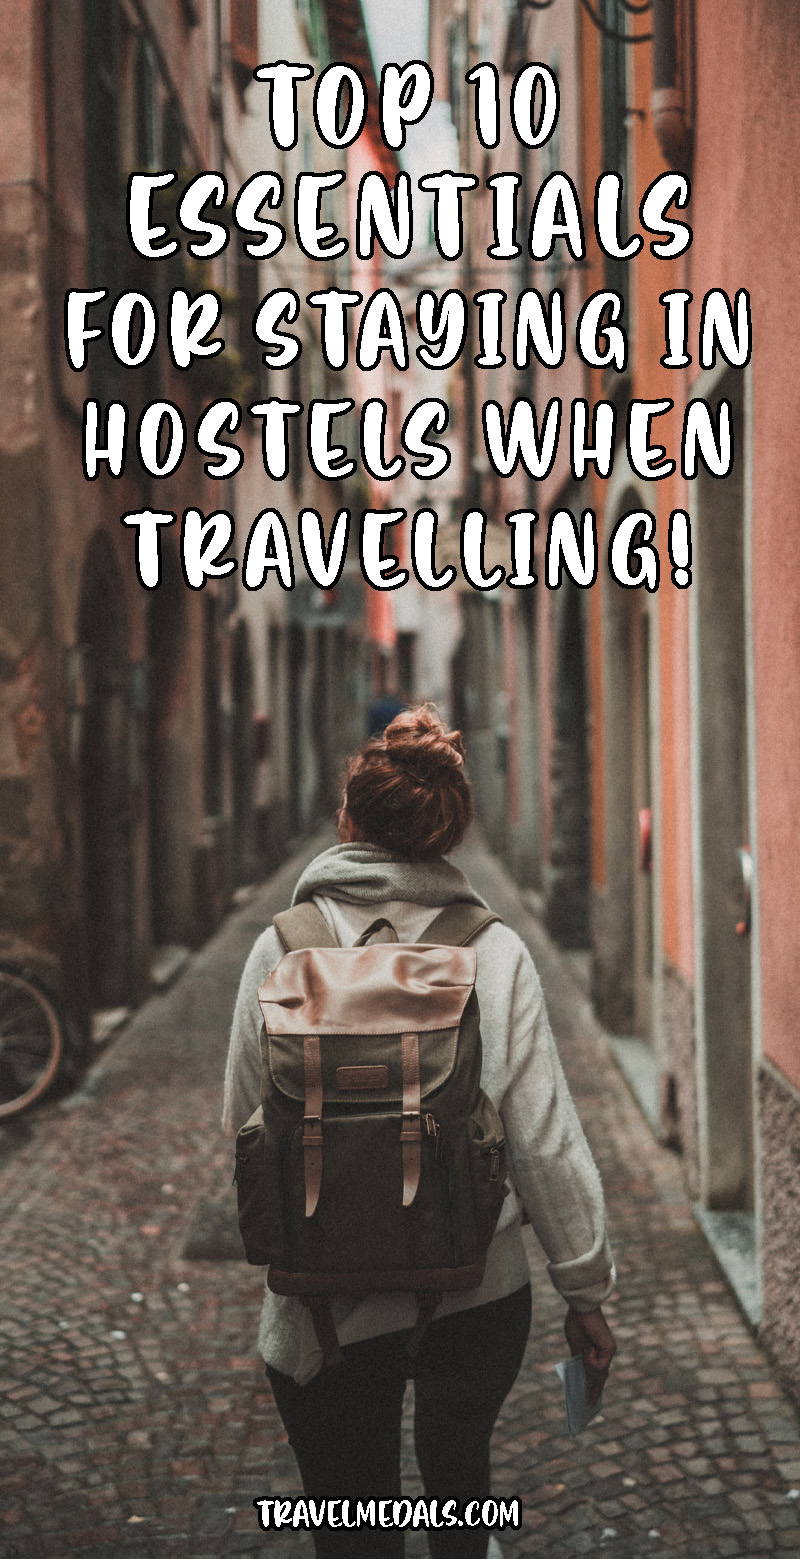 Too old for hostels? - Oneika the Traveller